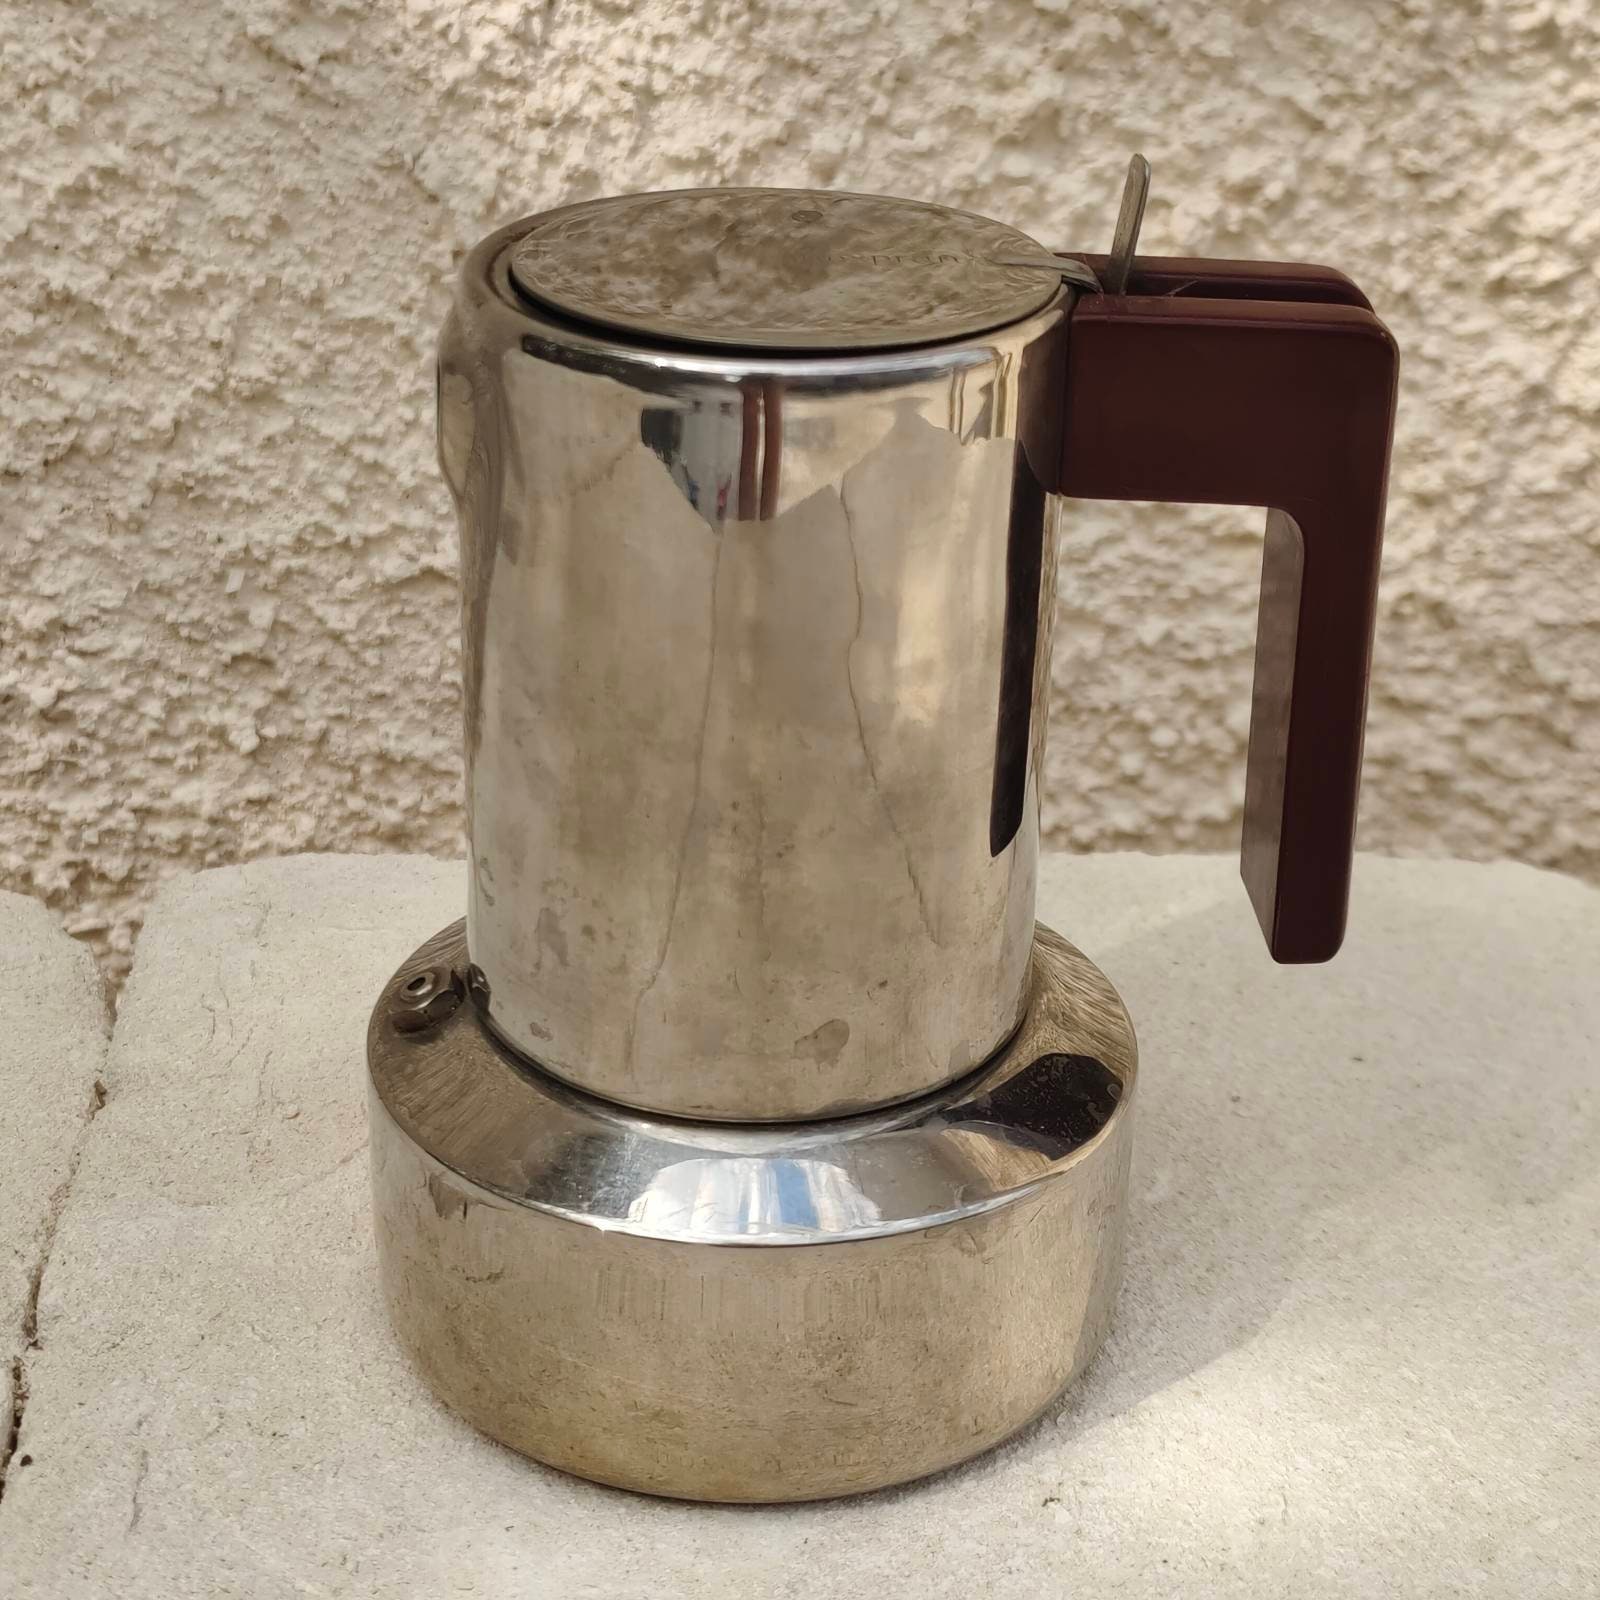 D Ecocoffee 6 Cups Stainless Steel Moka Pot Coffee Maker - China Stove Top  and Coffee Maker Pot price